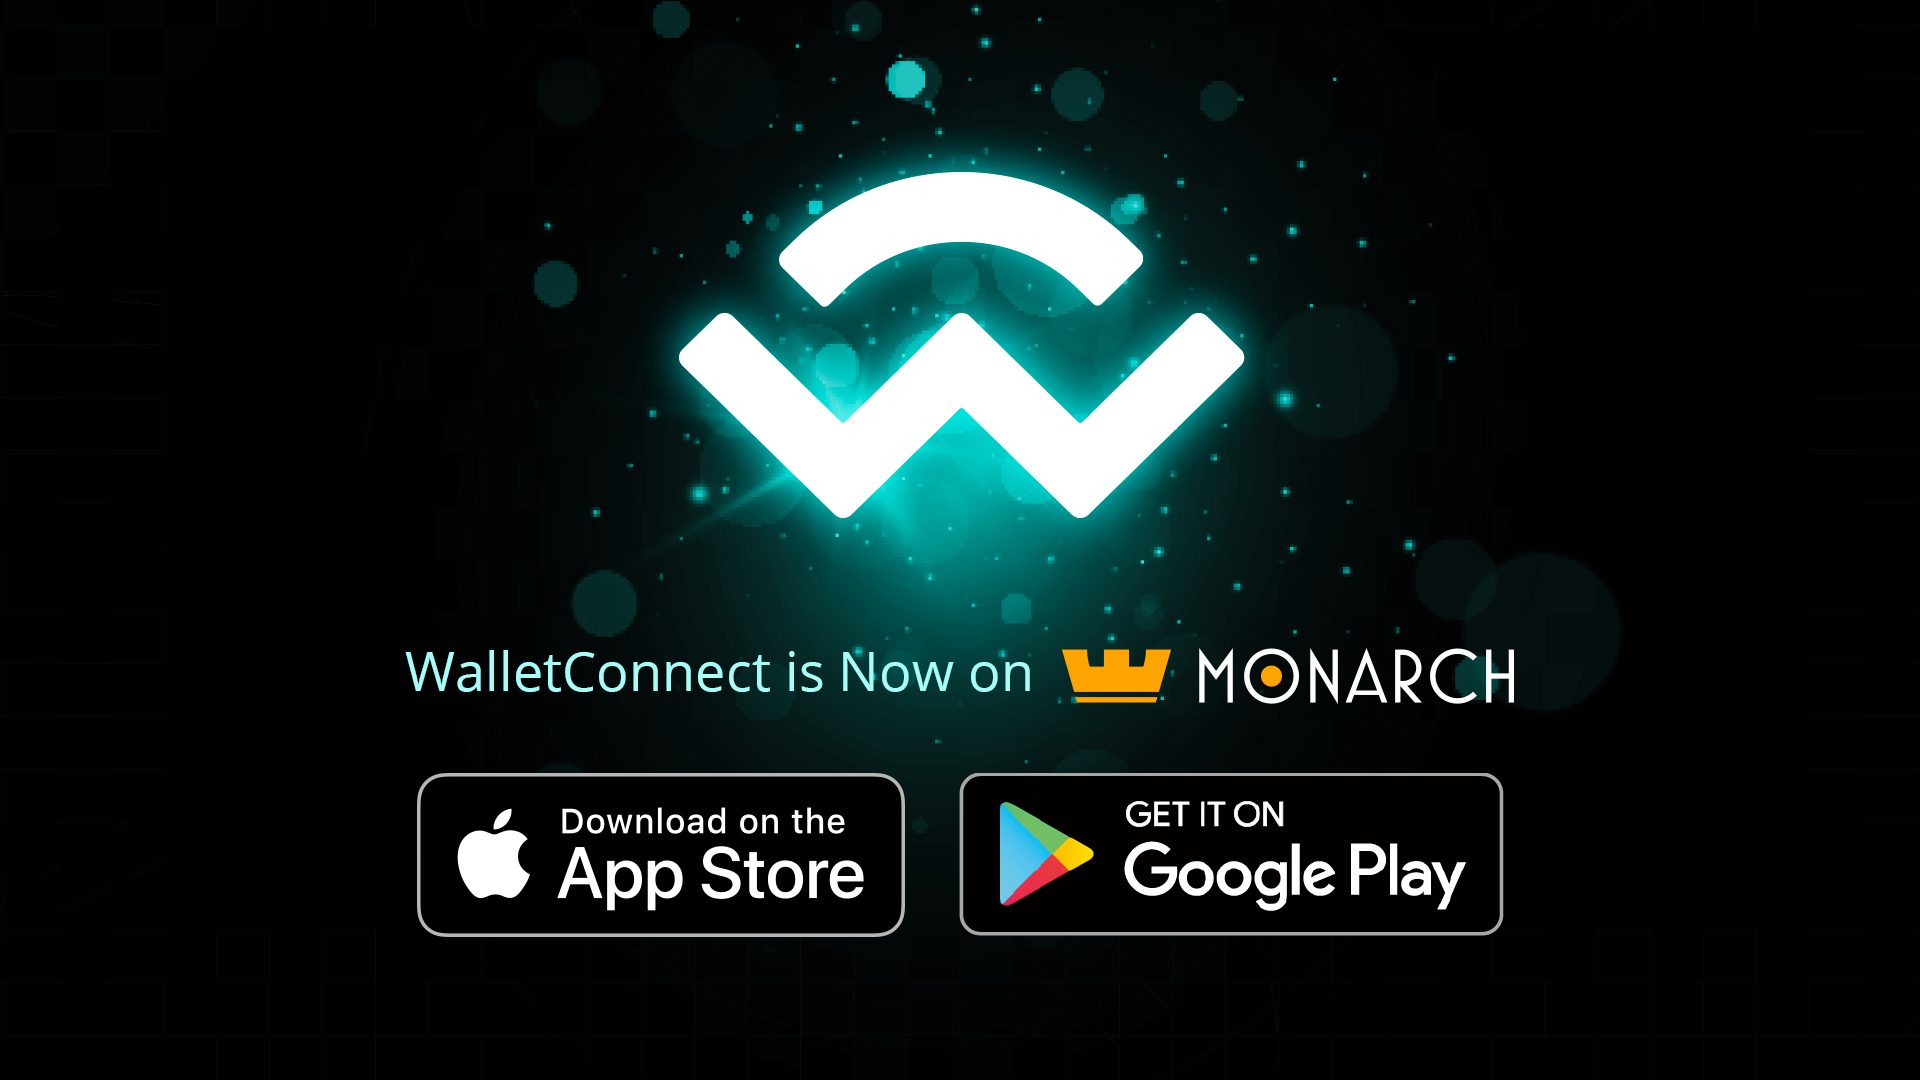 Monarch Wallet Update: WalletConnect Now Live on iOS & Android